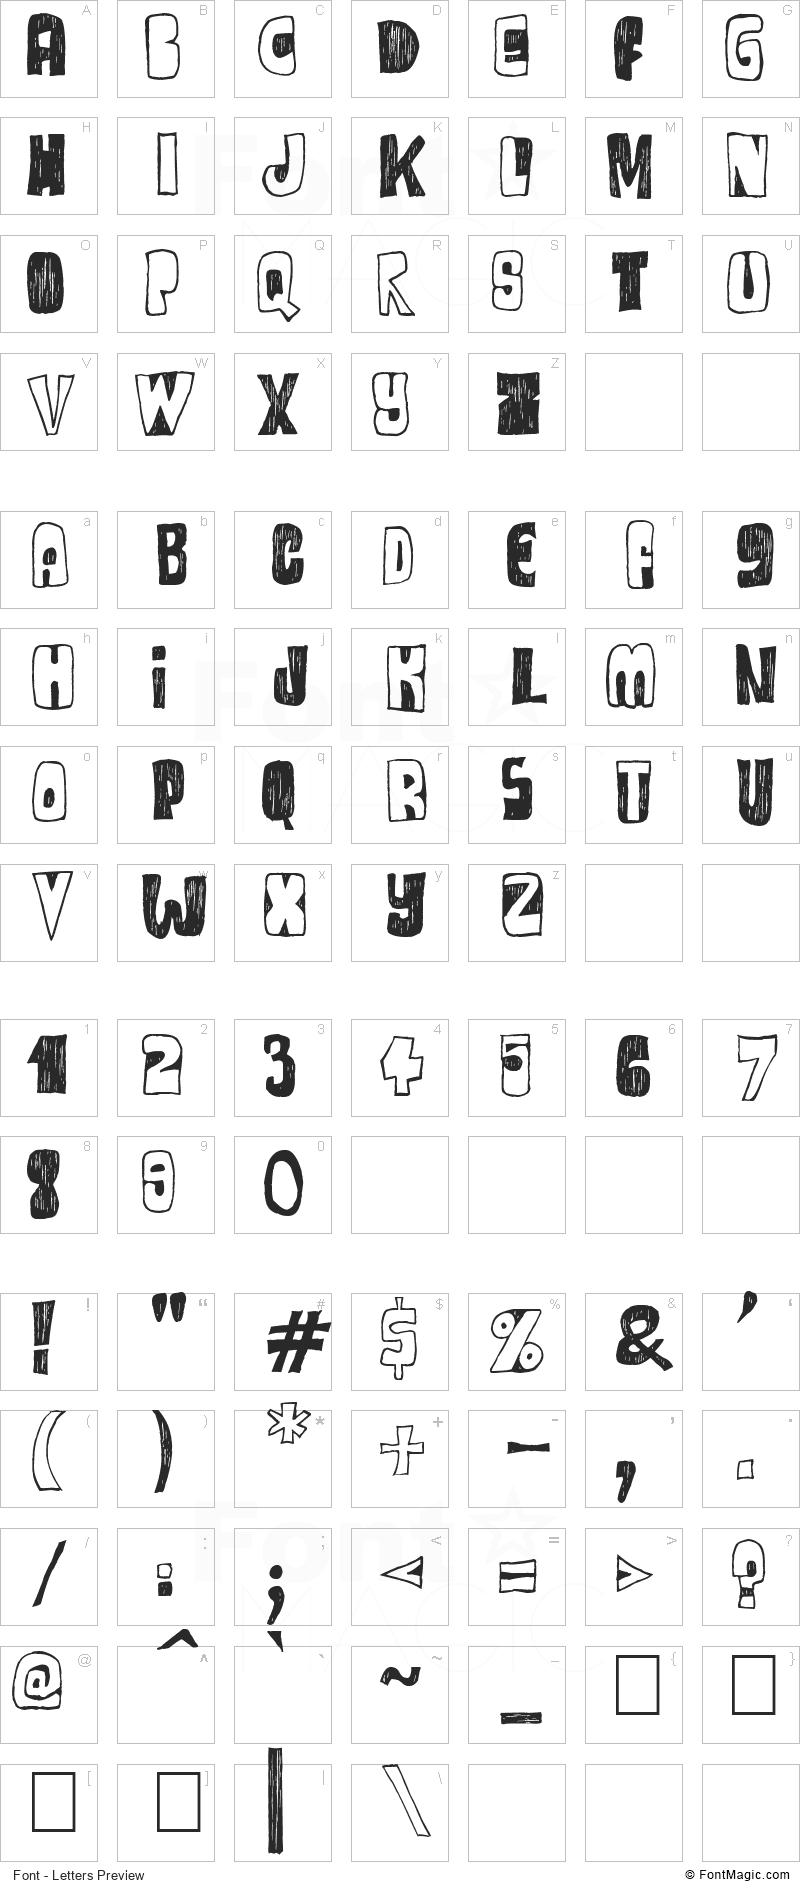 One Way Or Another Font - All Latters Preview Chart